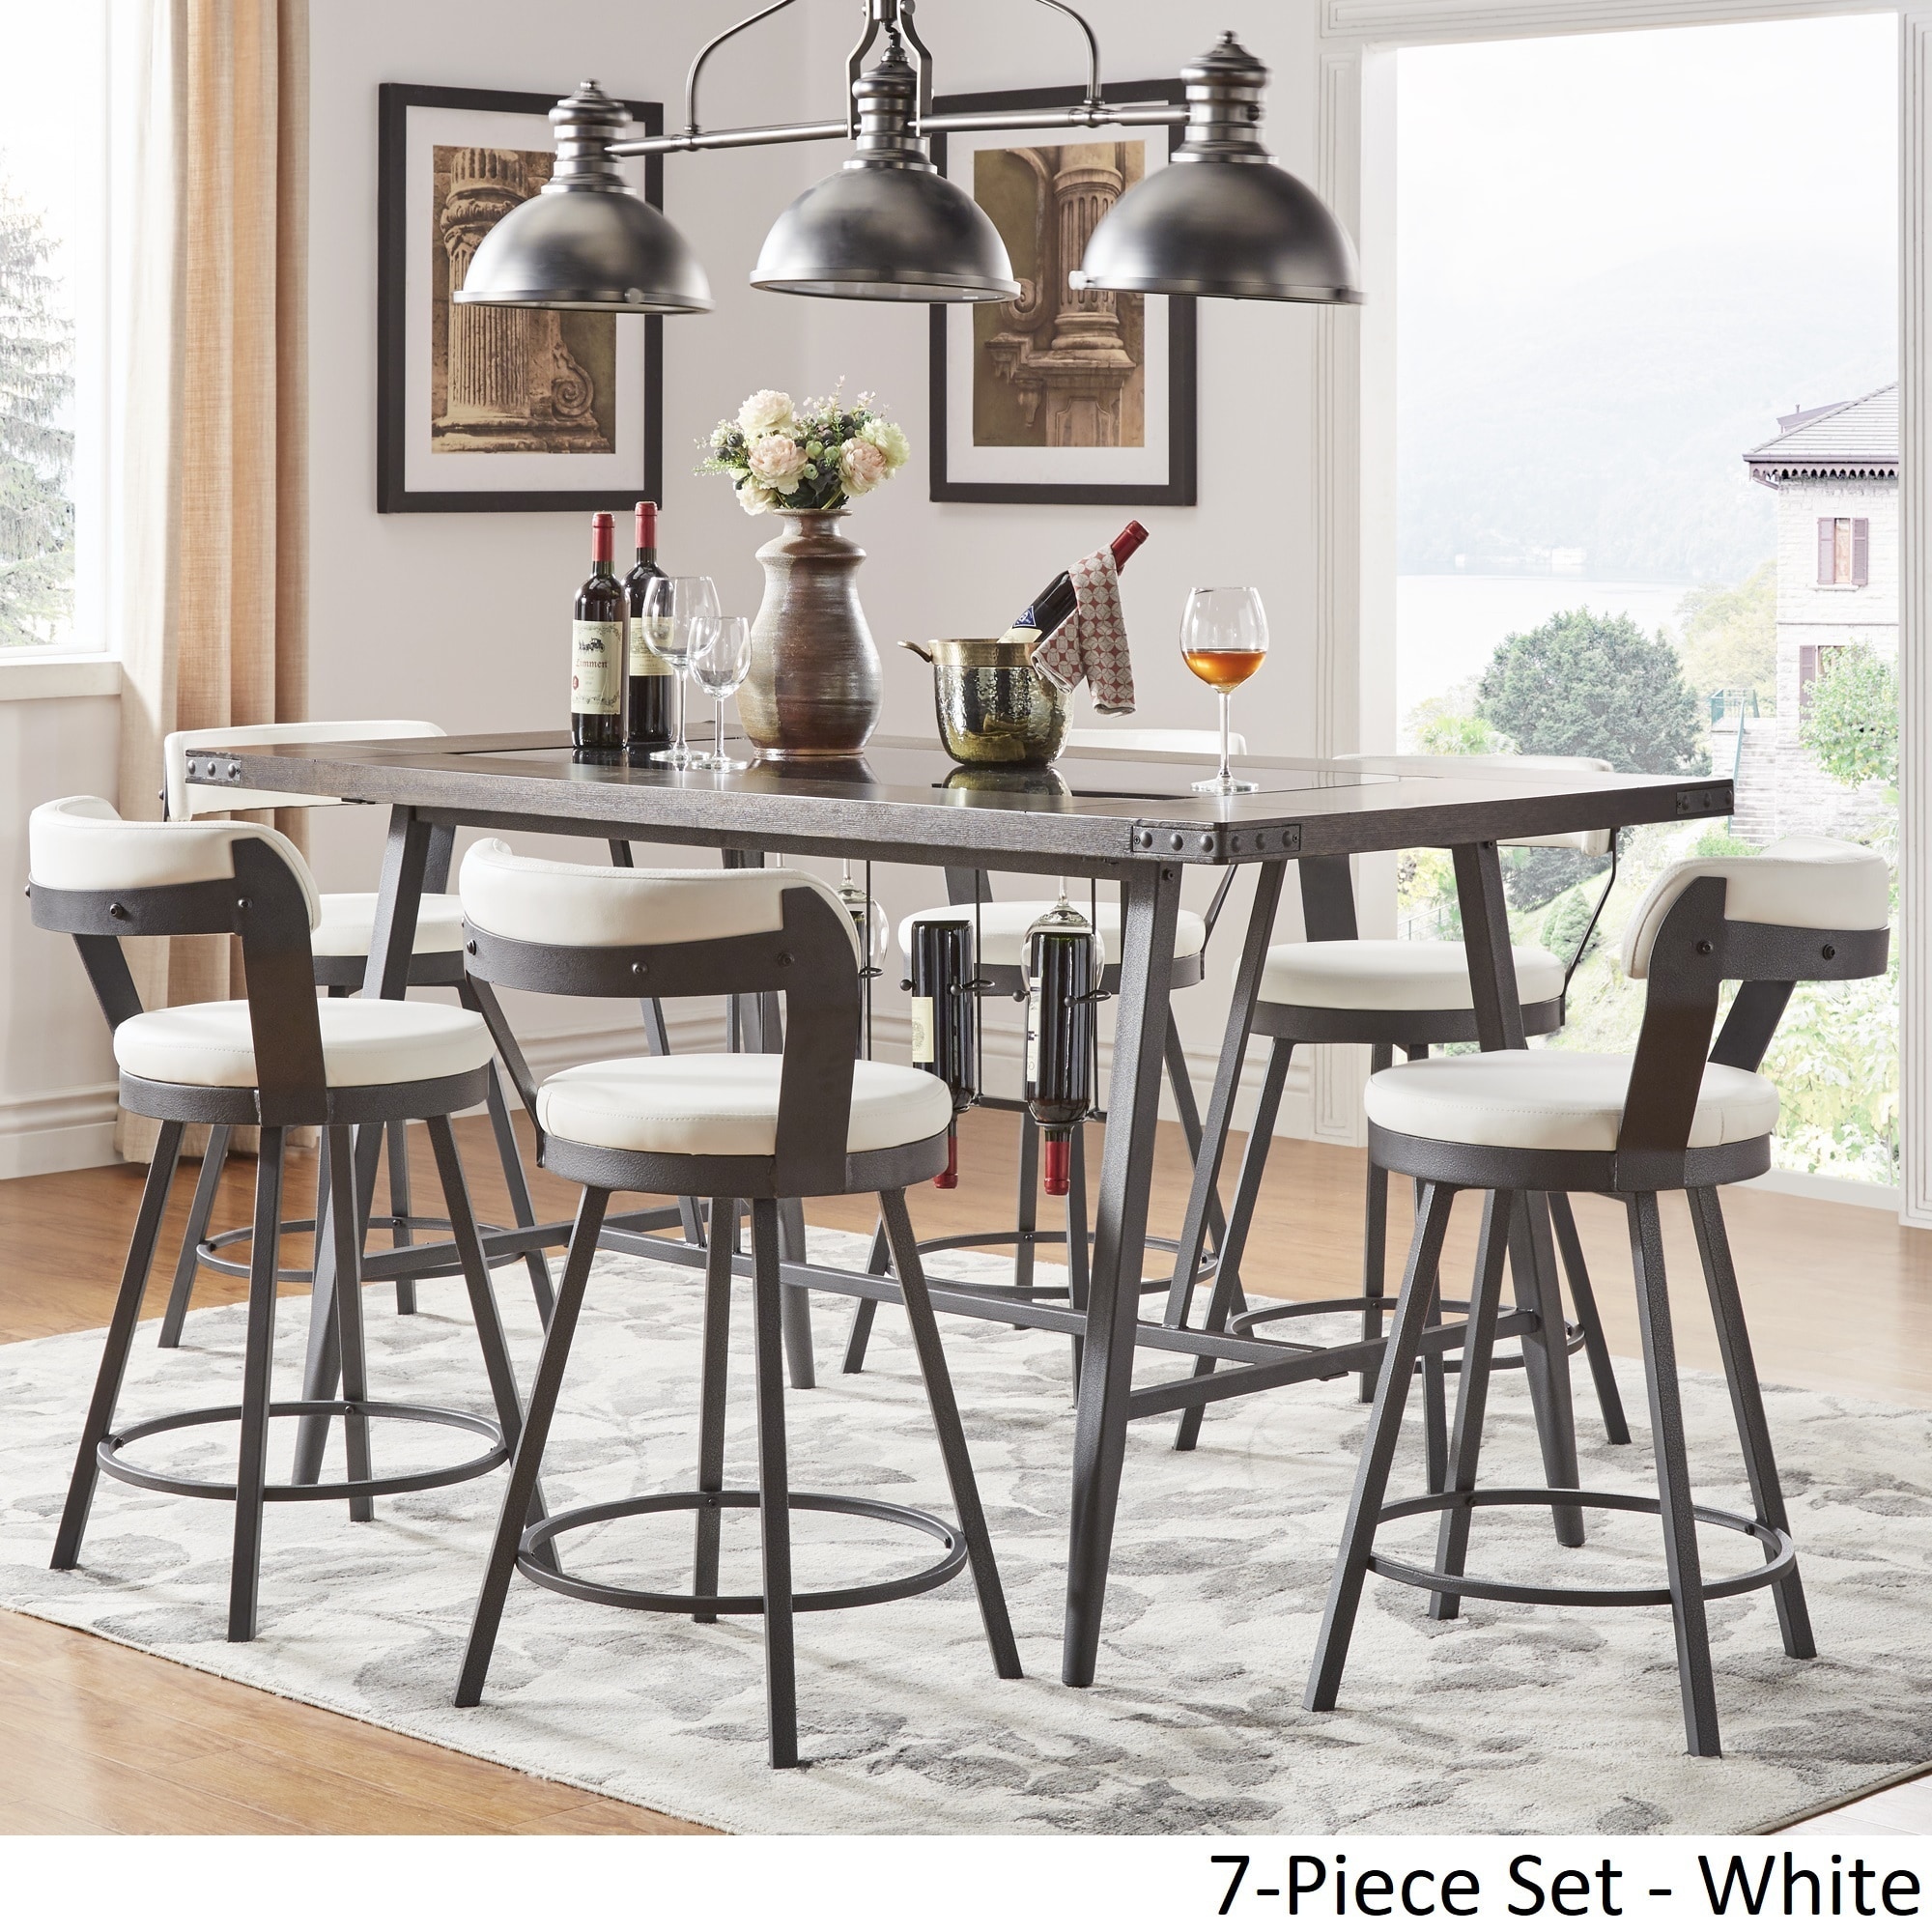 Harley Counter Height Dining Set With Wine Rack By Inspire Q Modern On Sale Overstock 18747630